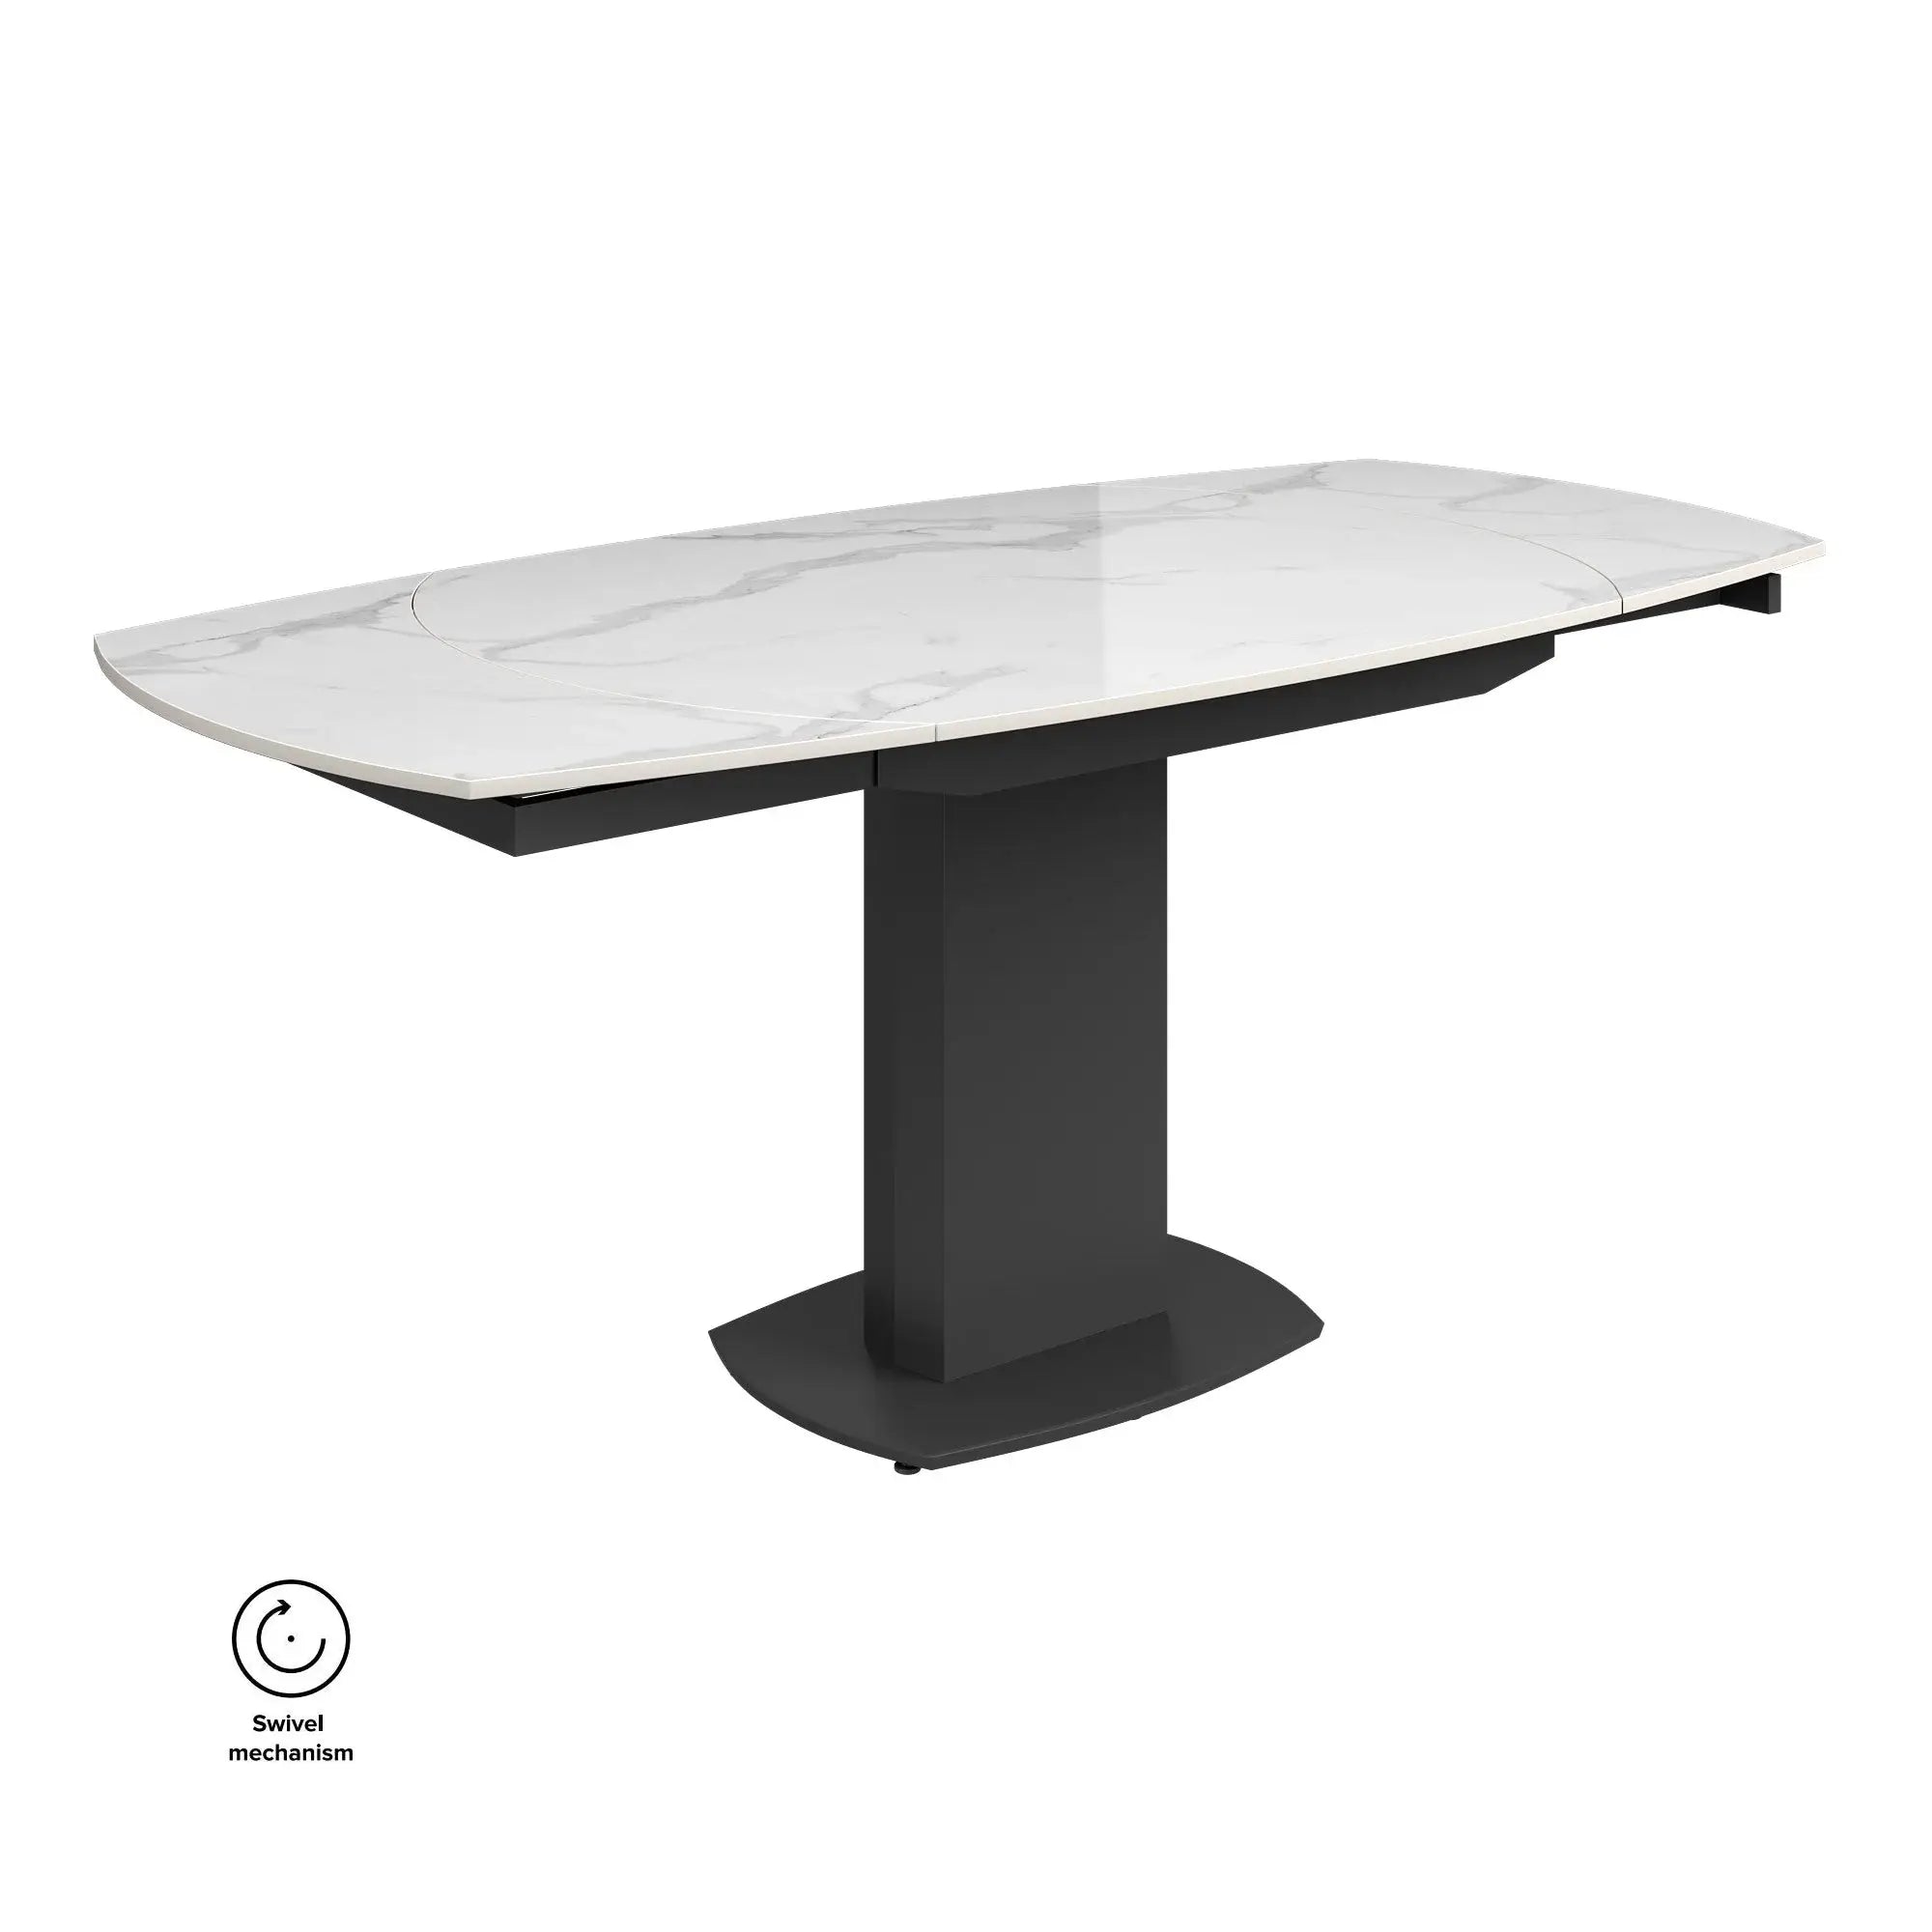 Ovaluxe Gloss White Ceramic Swivel Ext Dining Table